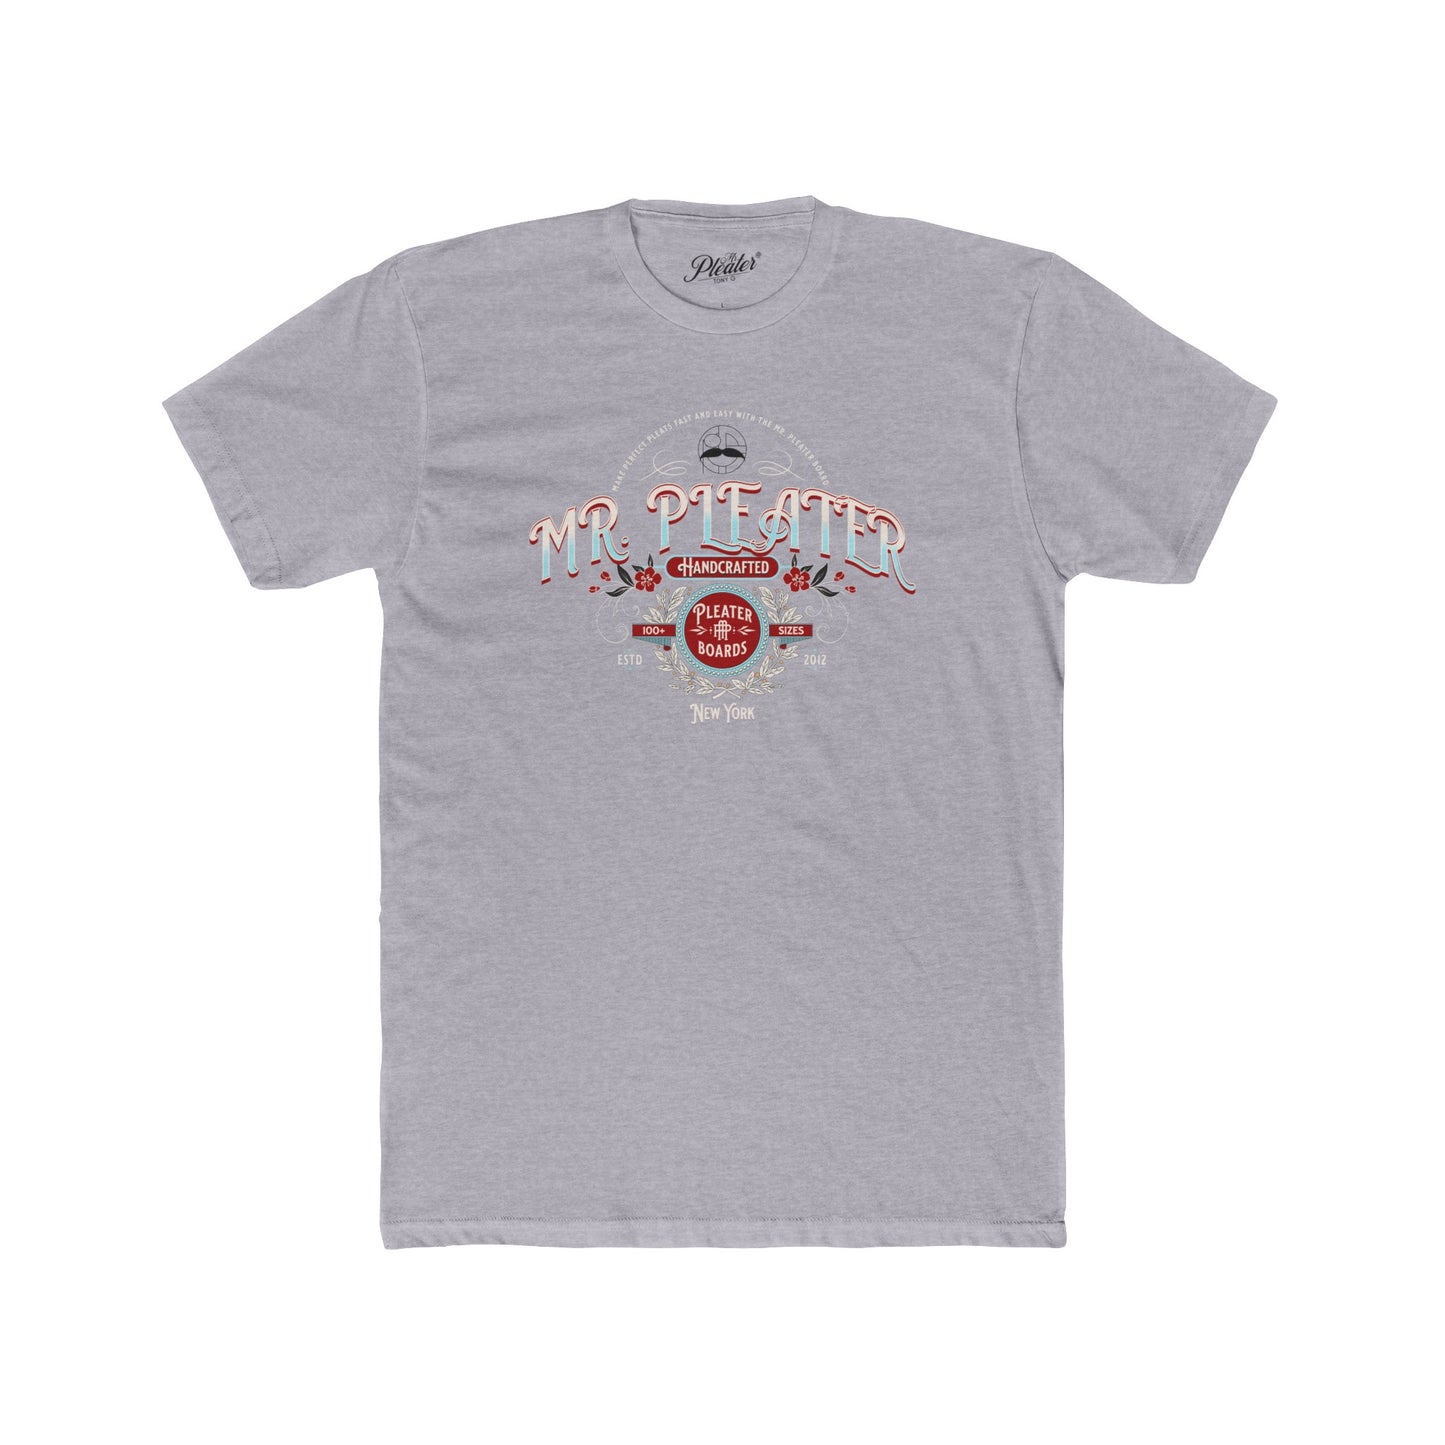 Mr. Pleater By TONY G Men's Cotton Crew Tee, featuring the Mr. Pleater Handcrafted Pleater Board design